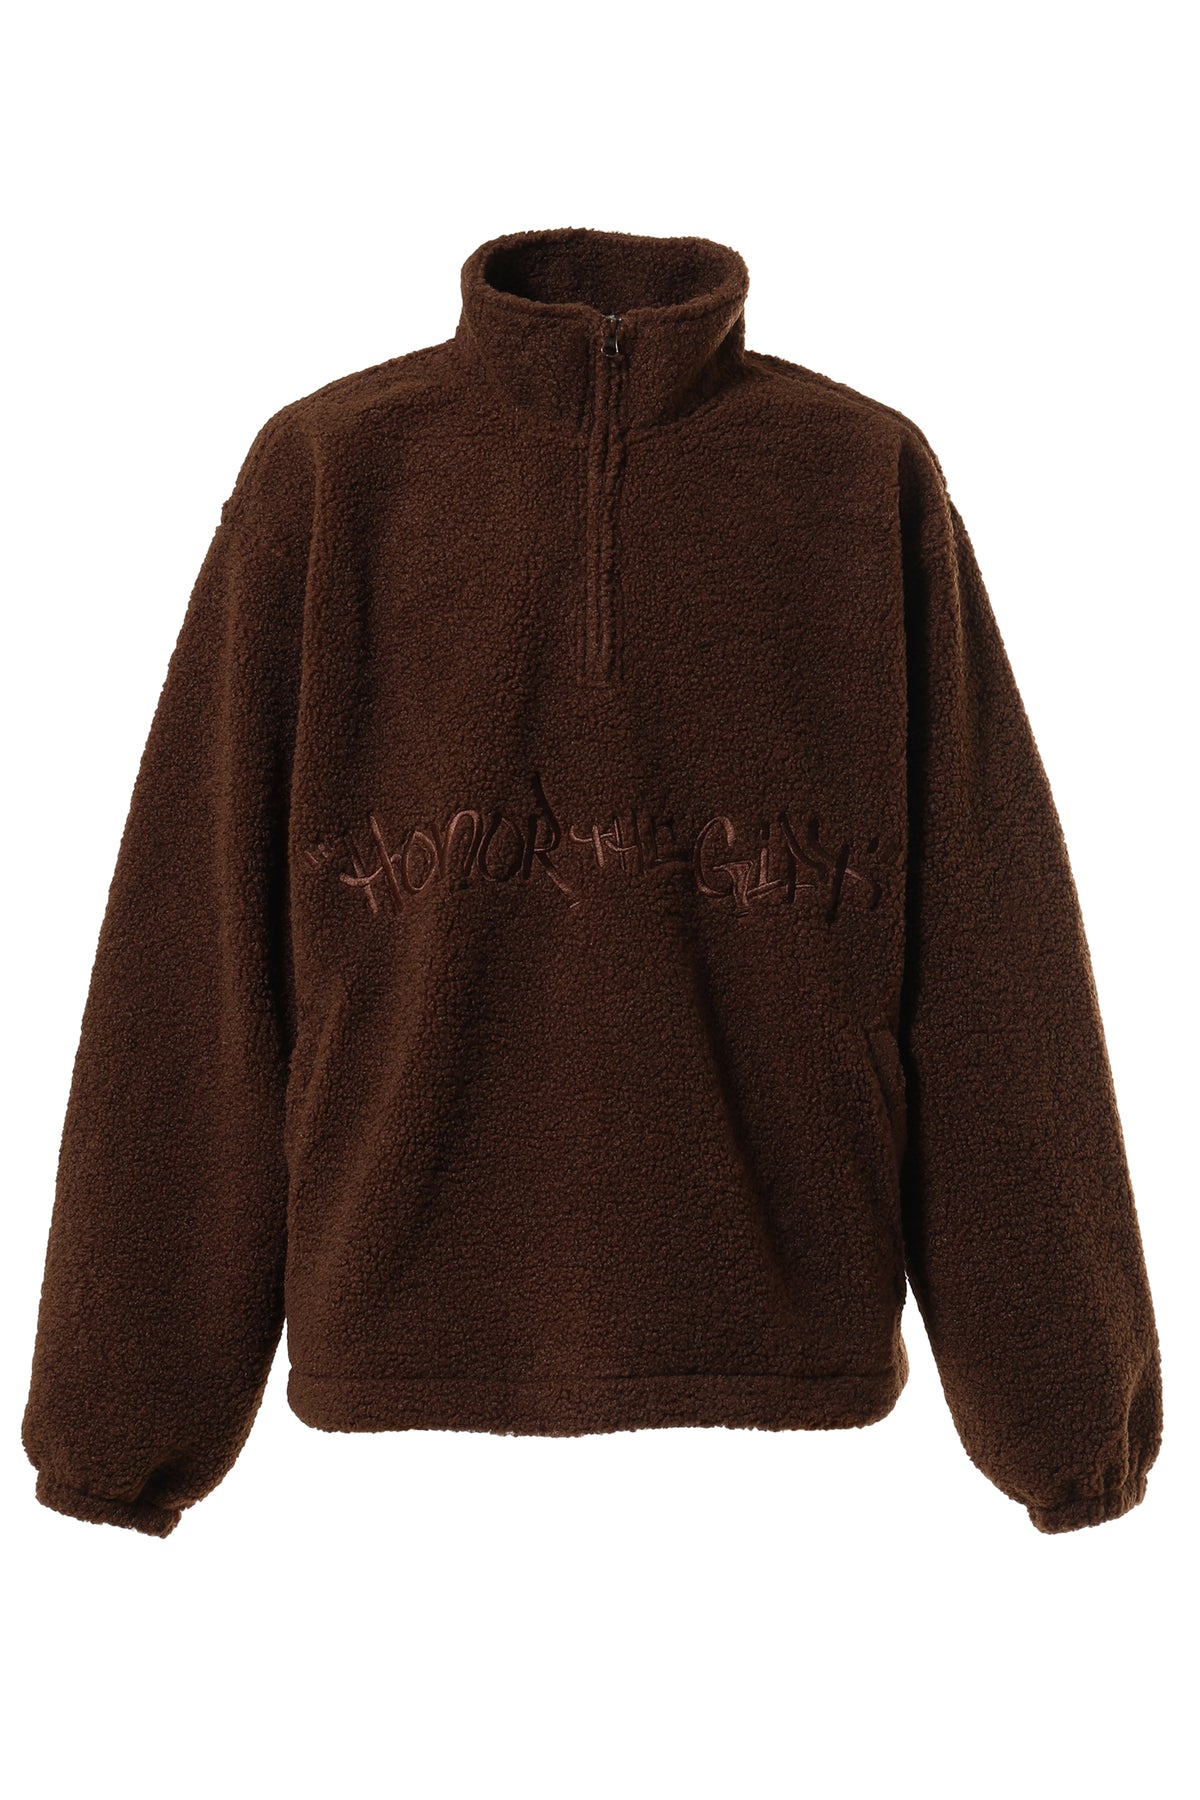 HONOR THE GIFT SCRIPT SHERPA PULLOVER / BRWN